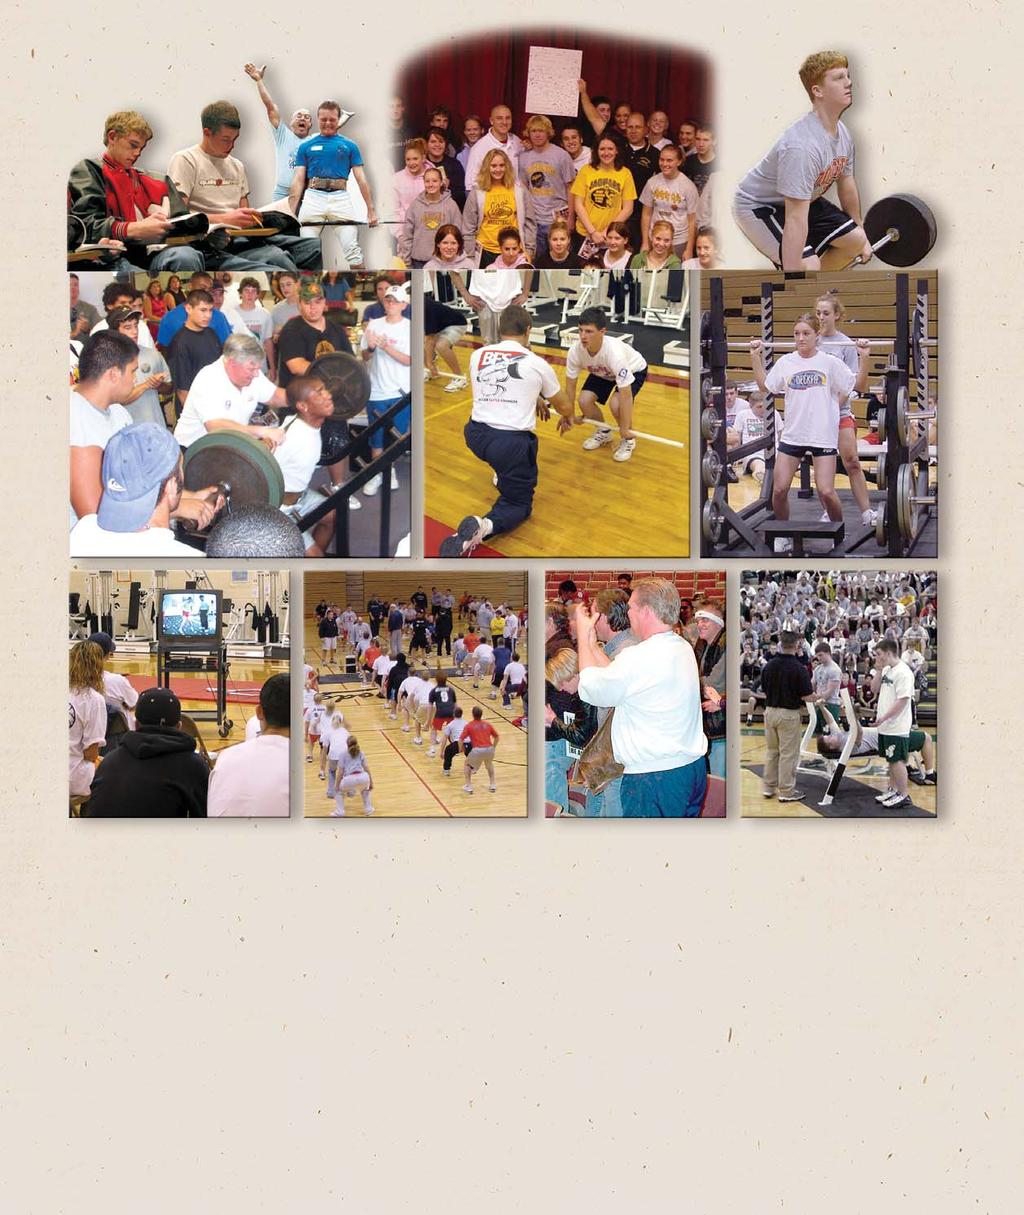 TOTAL PROGRAM CLINIC The complete BFS experience: All athletes and